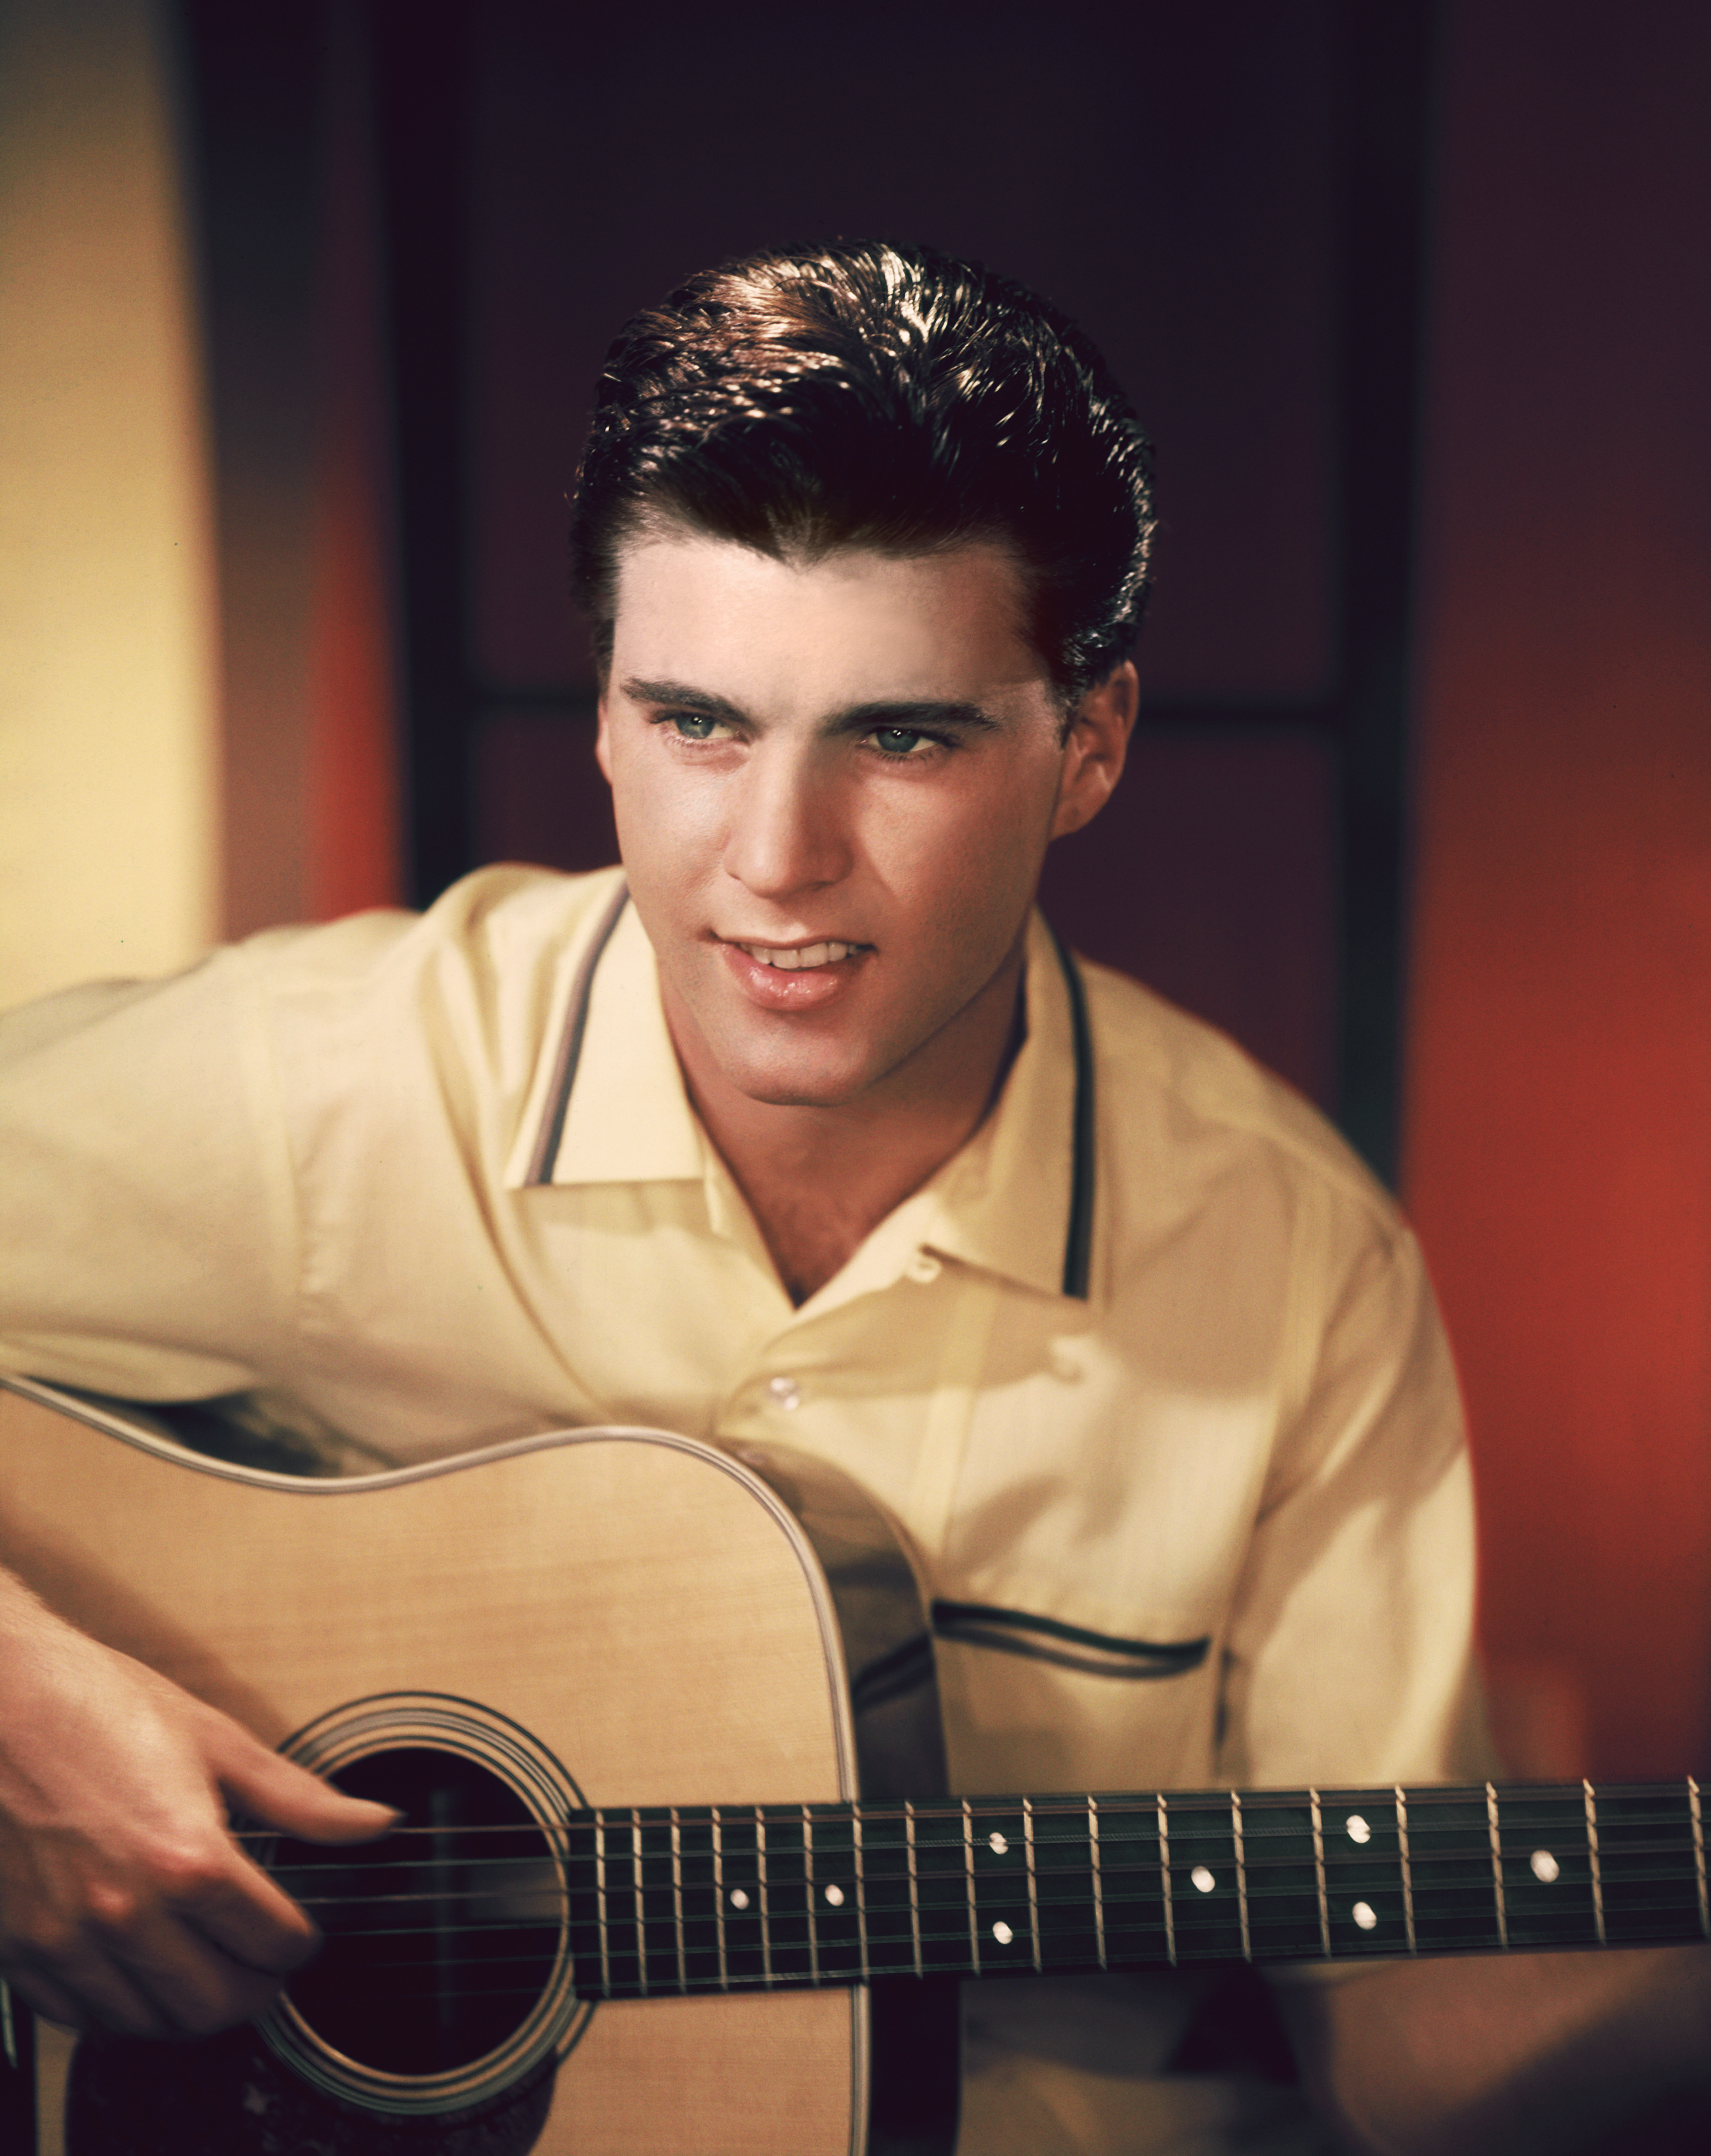 Ricky Nelson (1940 - 1985), circa 1960 | Source: Getty Images